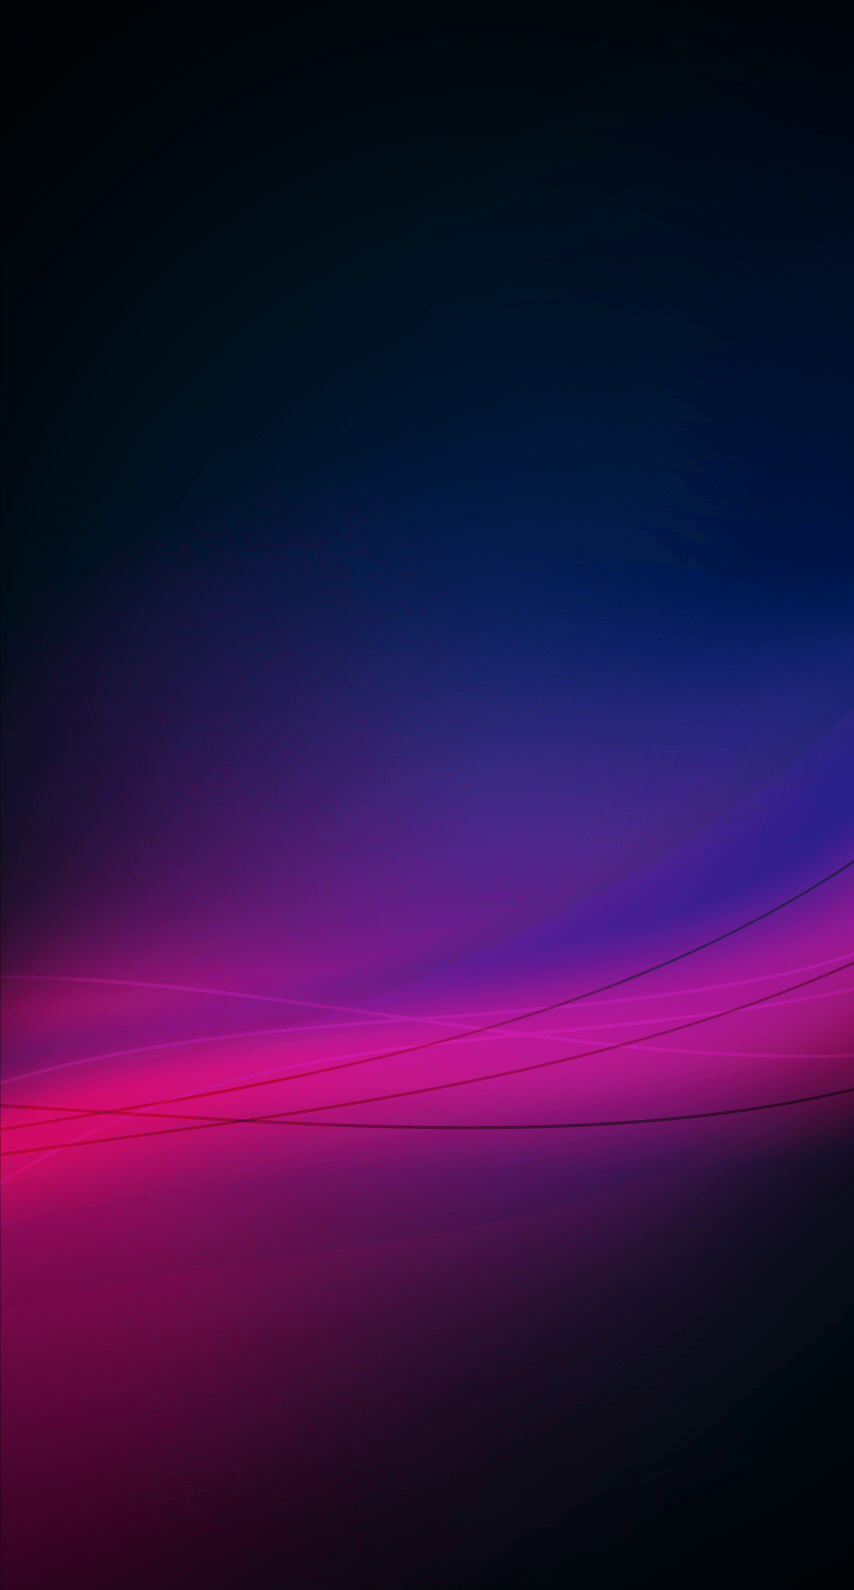 Black and purple iphone wallpapers